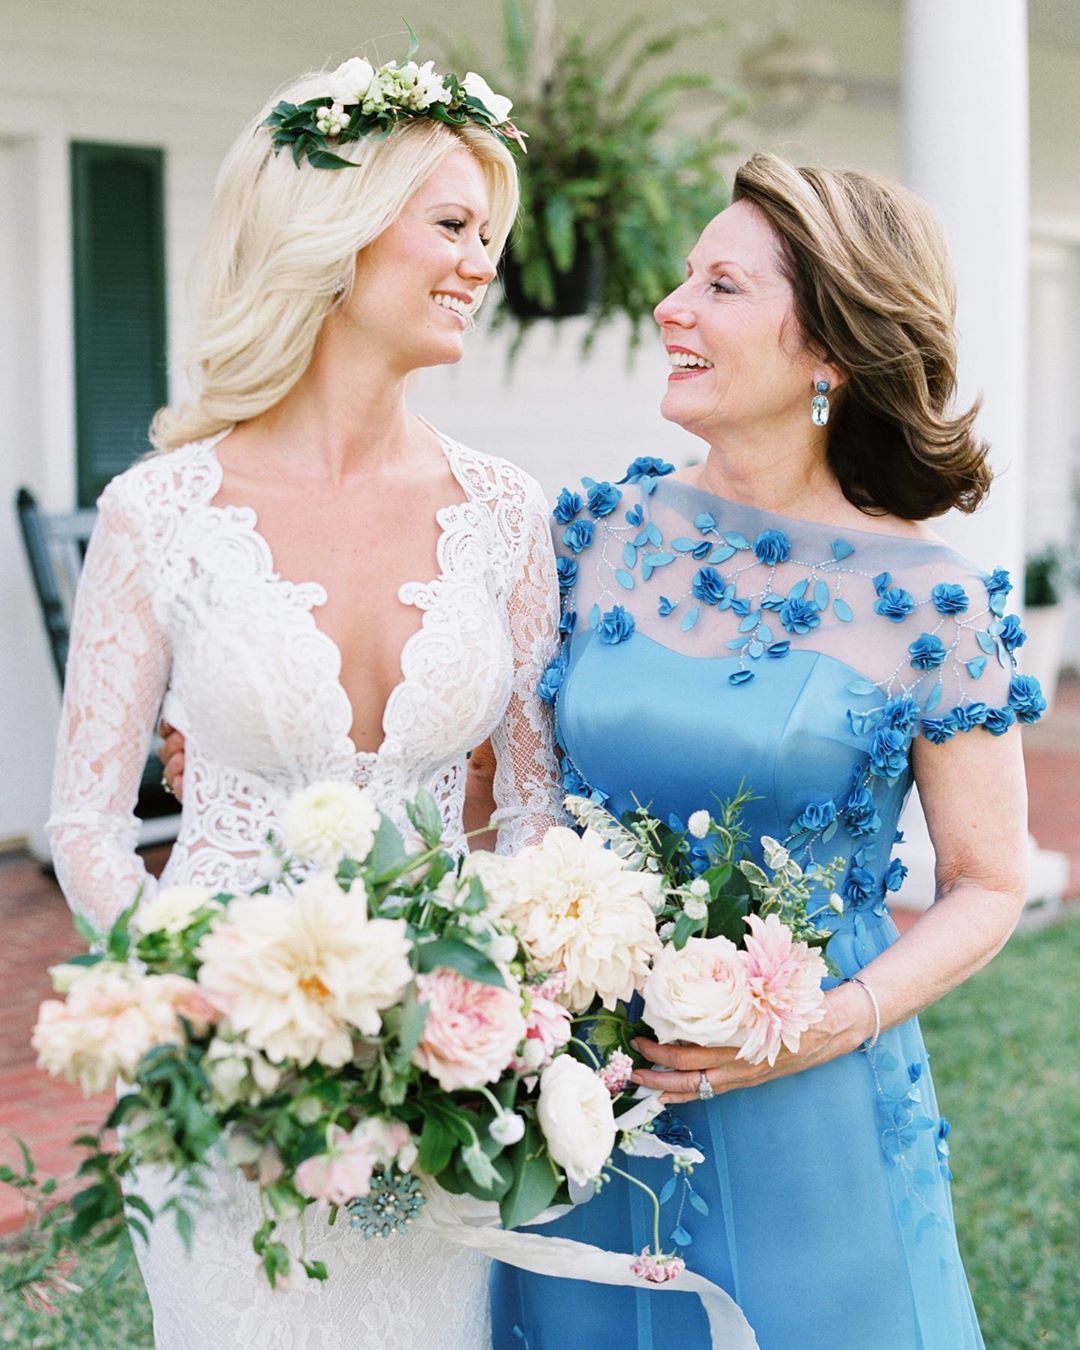 Mother-of-the-Bride Dresses That Wowed at Weddings